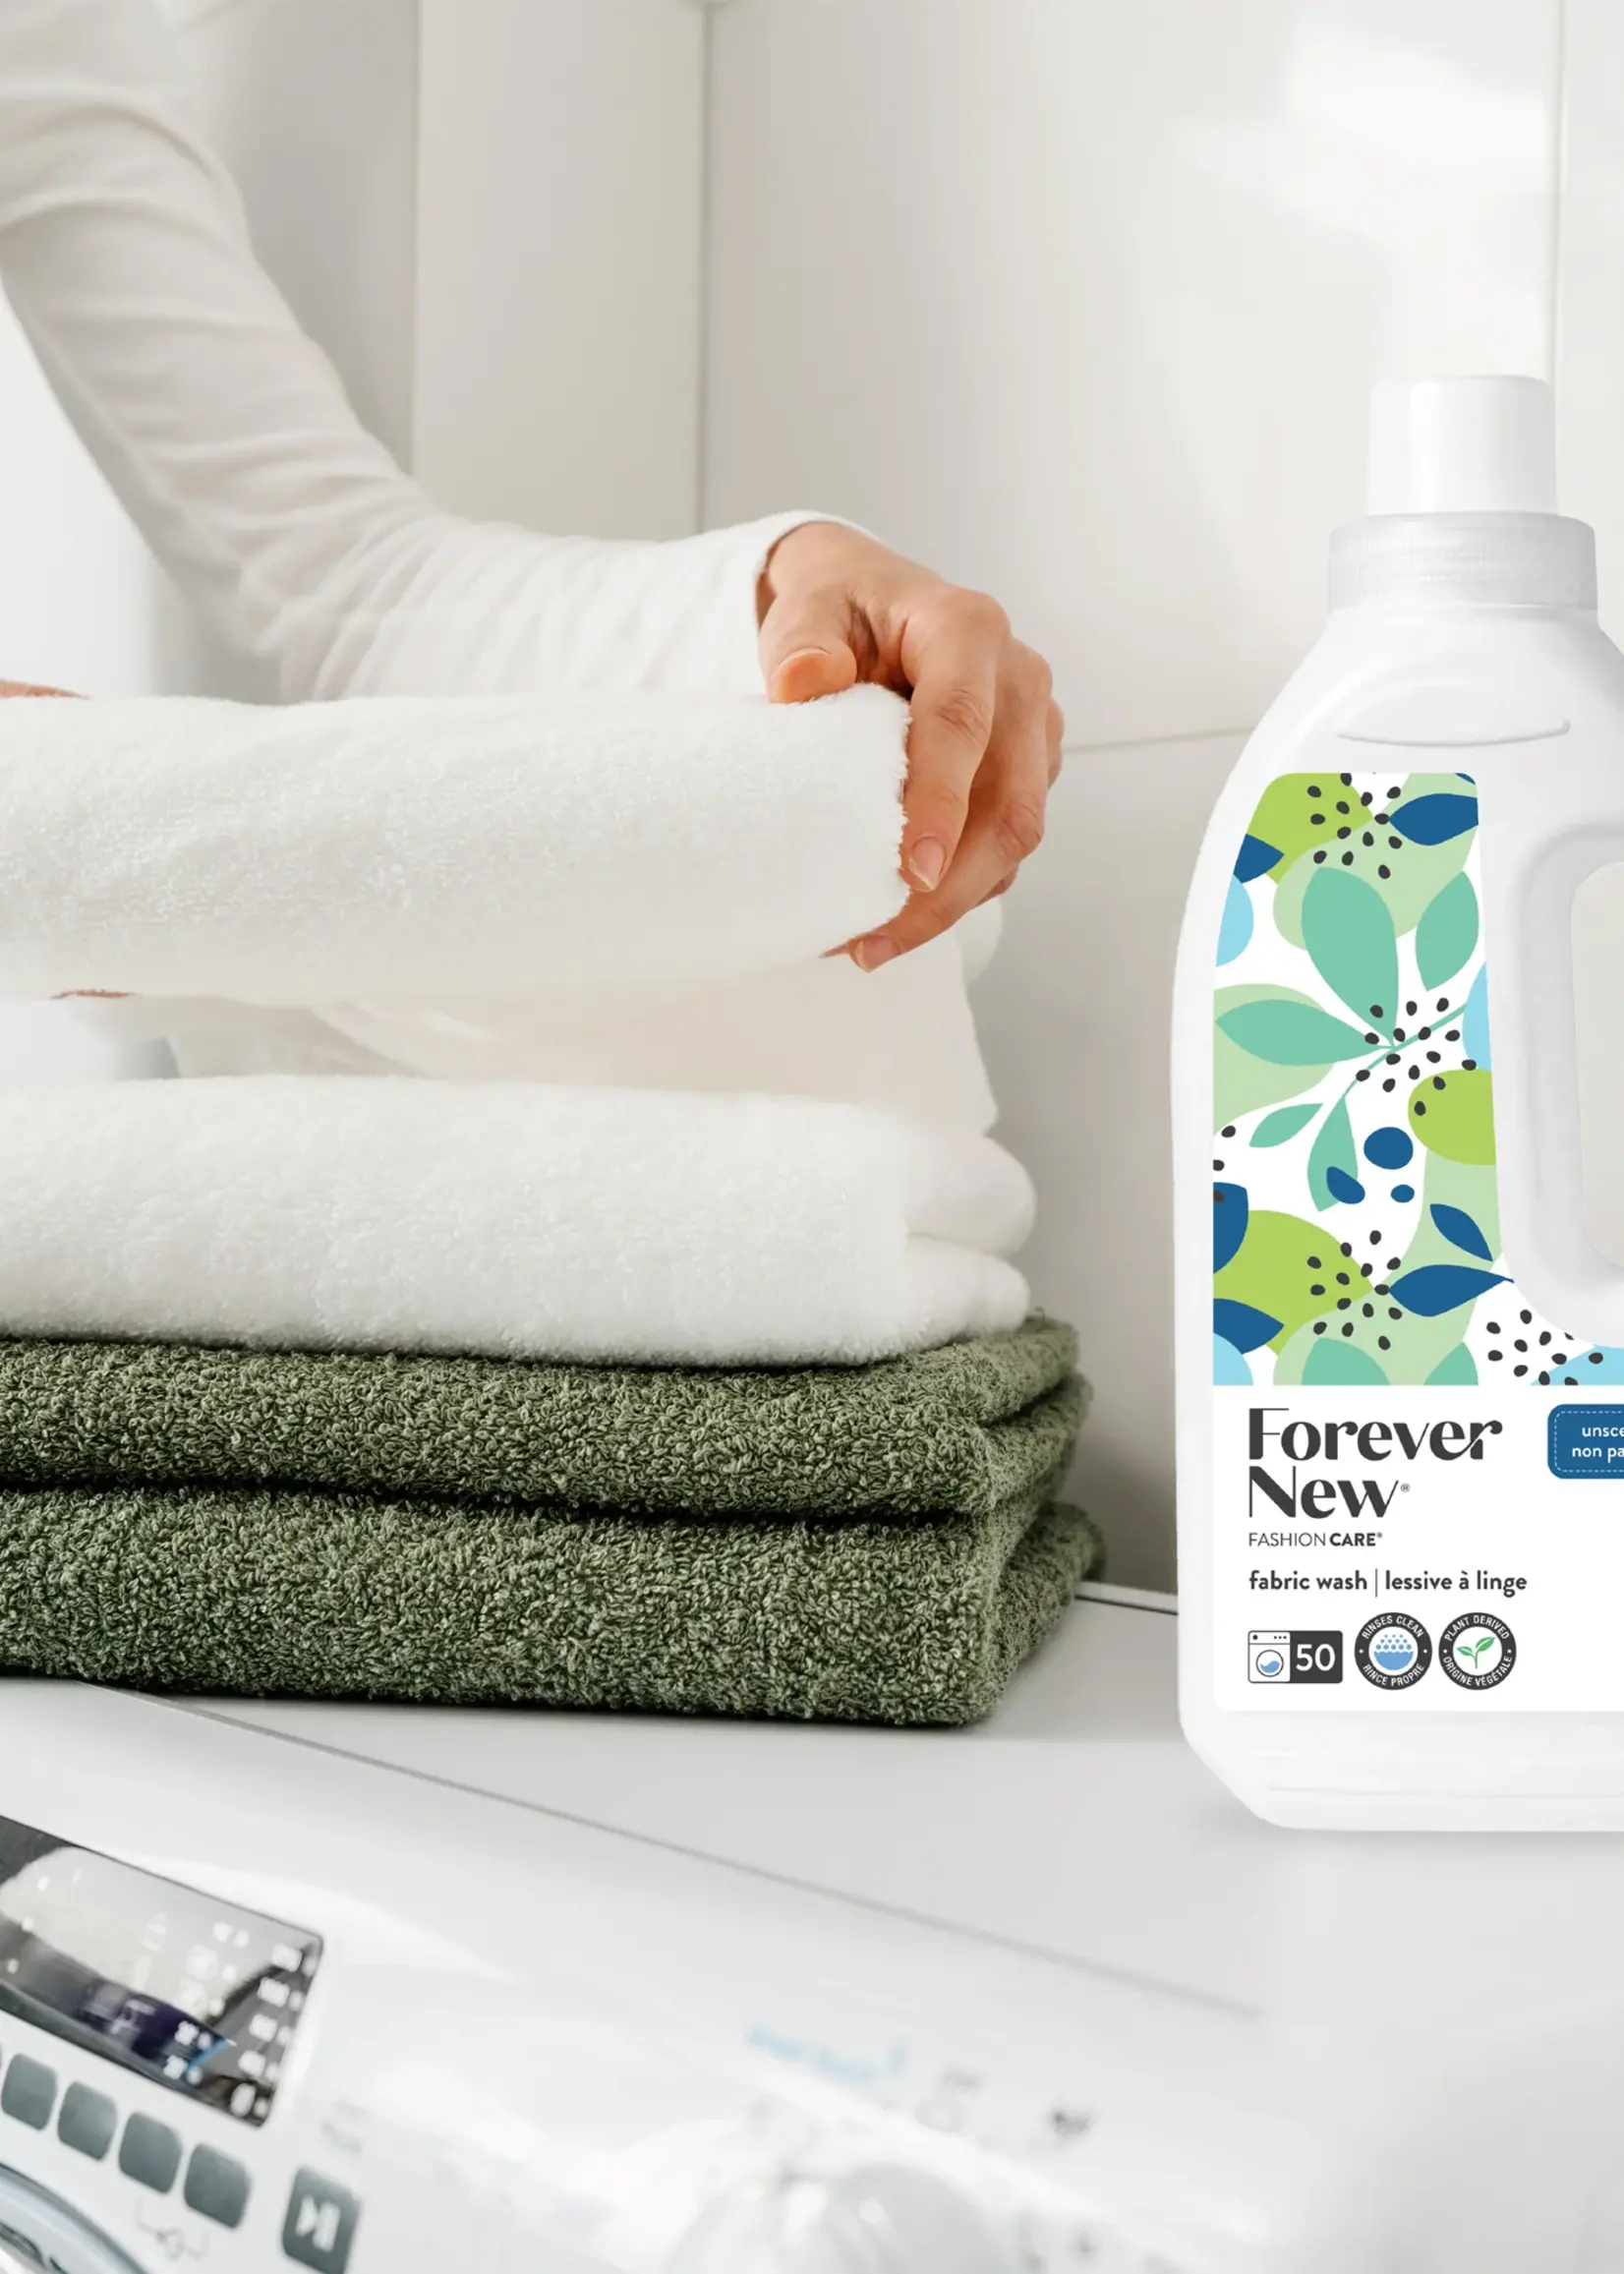  Forever New 32oz Liquid Unscented Fabric Care Wash 2 Pack (64oz  Total) Natural Laundry Detergent : Health & Household